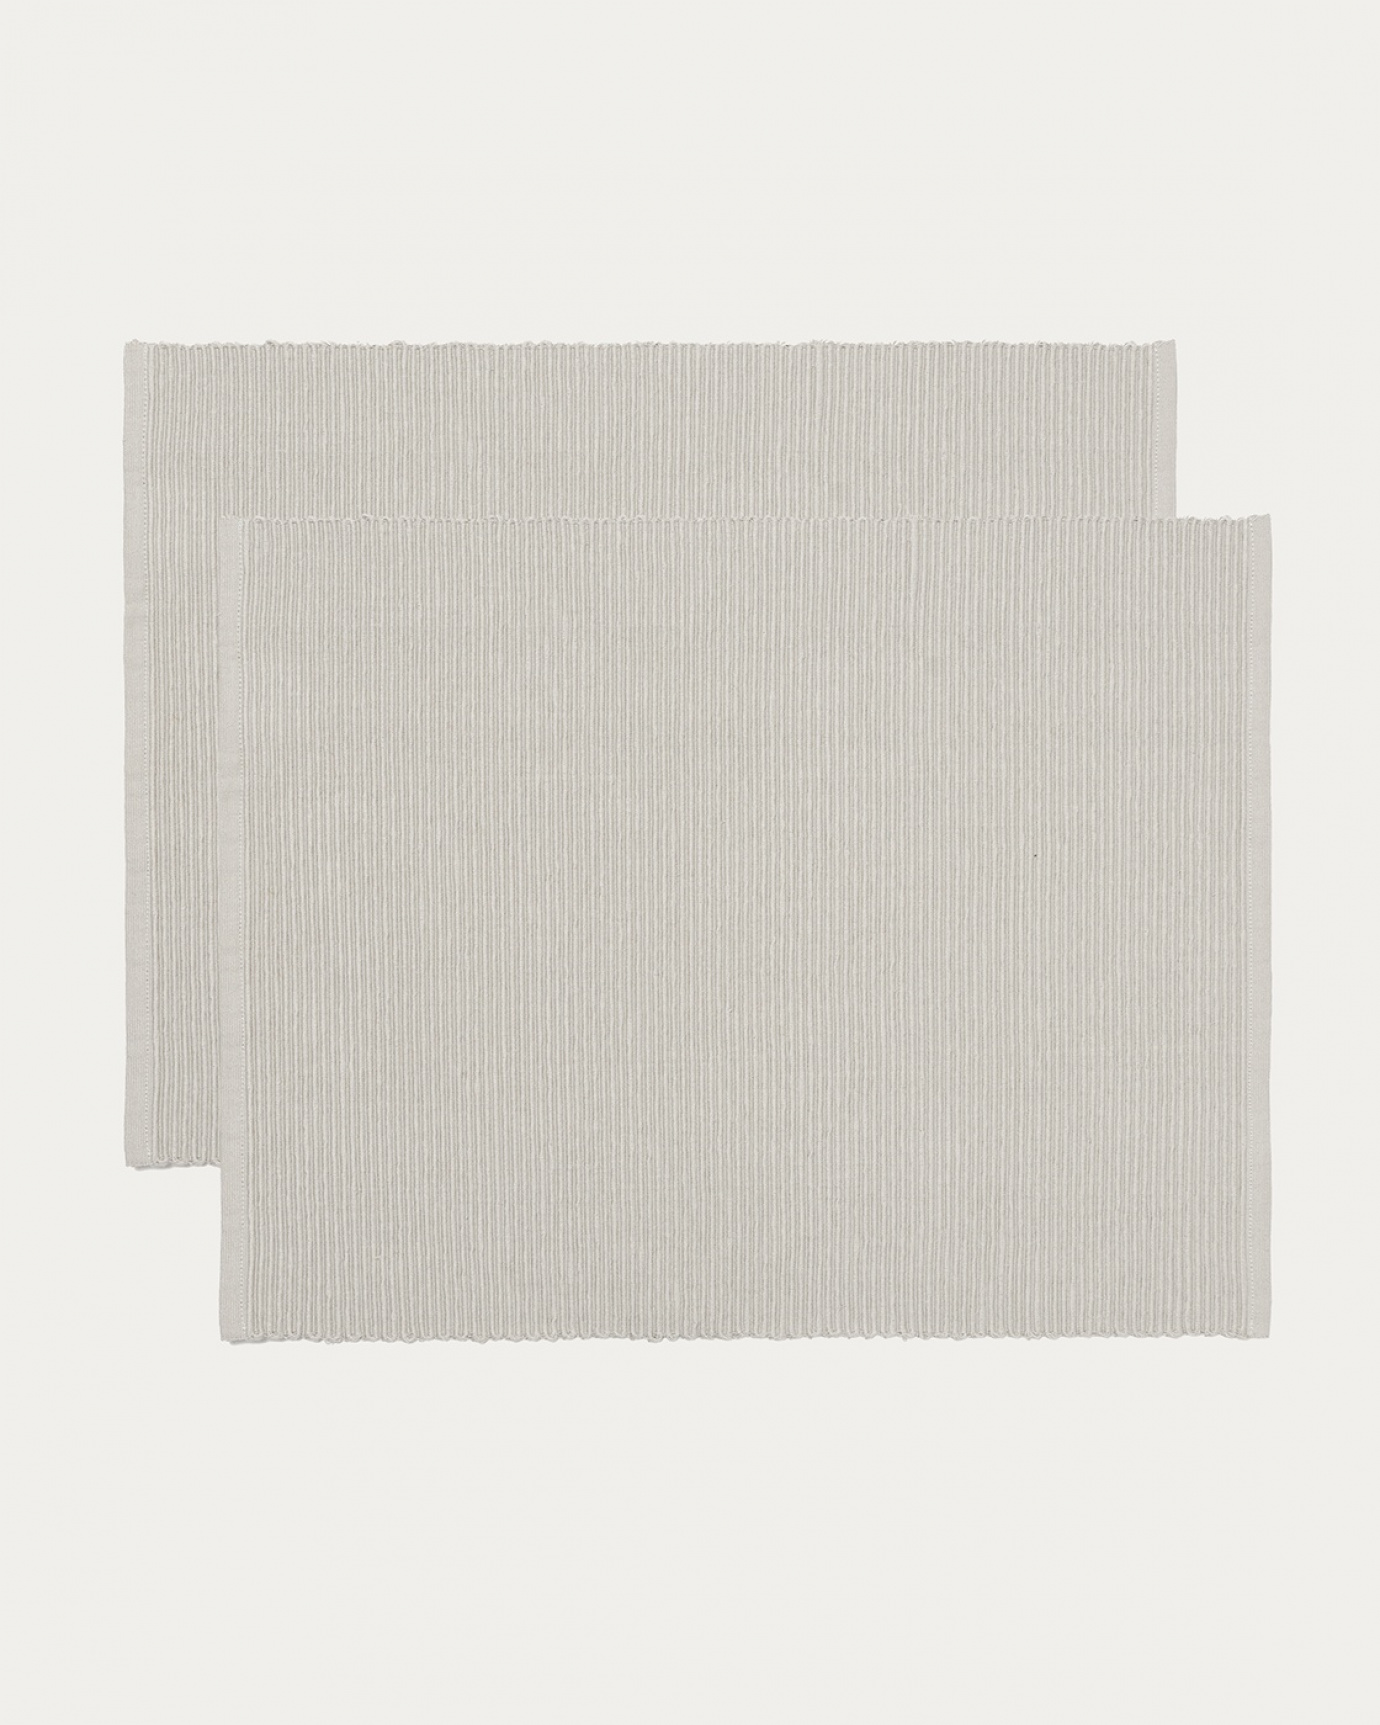 Product image light grey UNI placemat made of soft cotton in ribbed quality from LINUM DESIGN. Size 35x46 cm and sold in 2-pack.